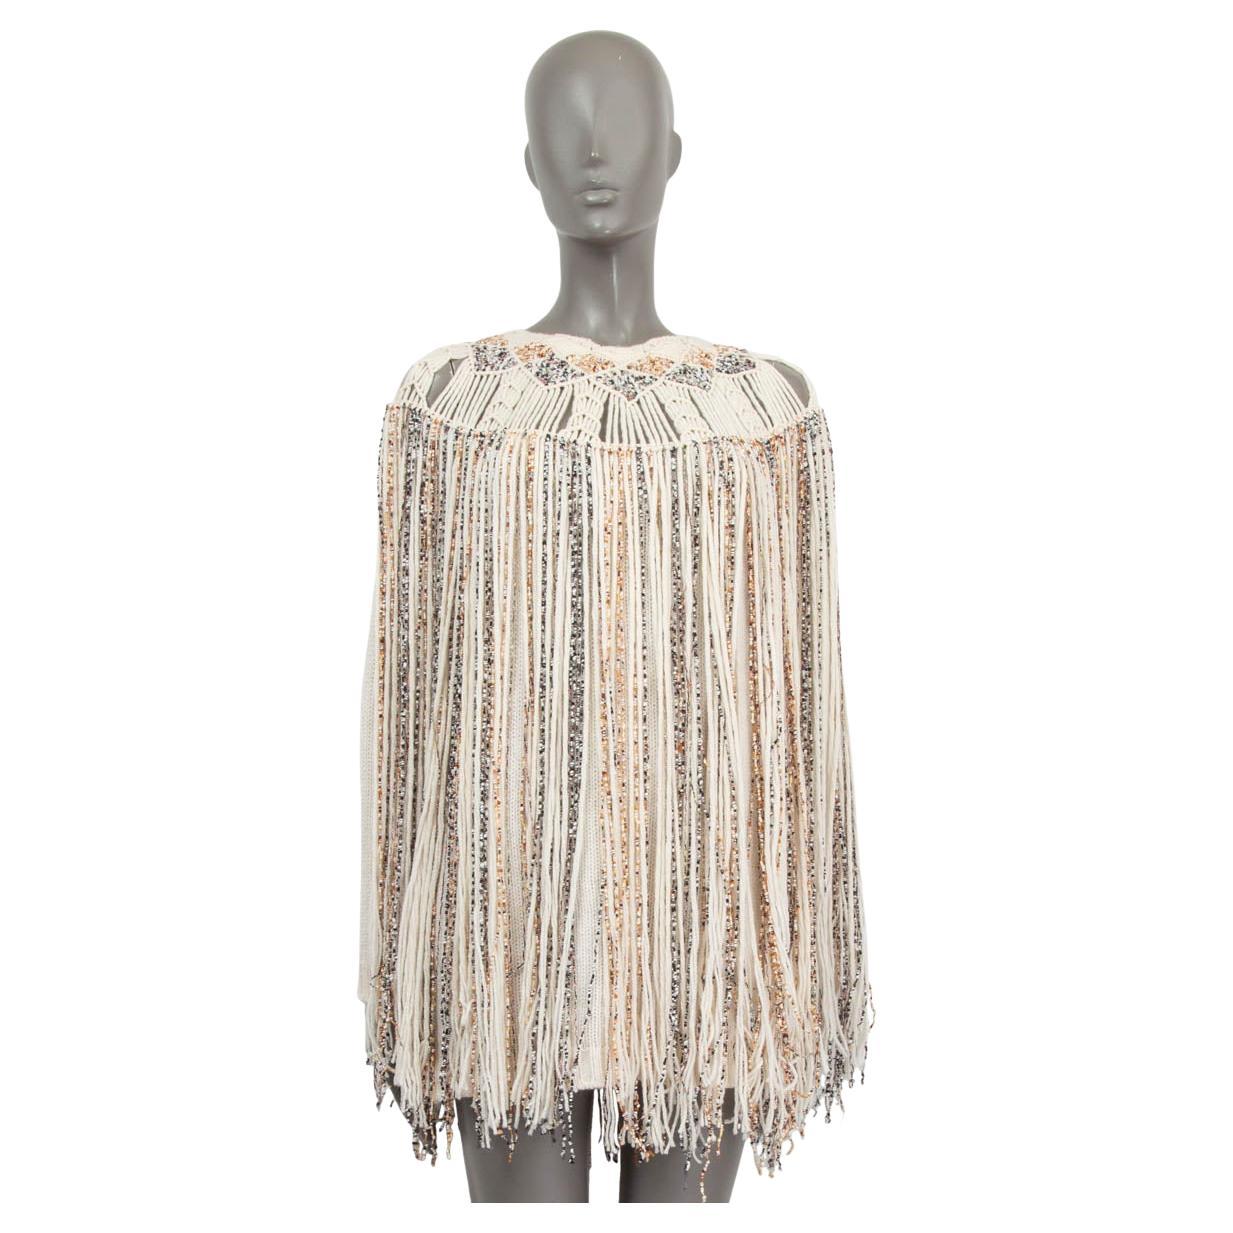 CHRISTIAN DIOR off-white cashmere 2018 FRINGED KNIT Dress 38 S